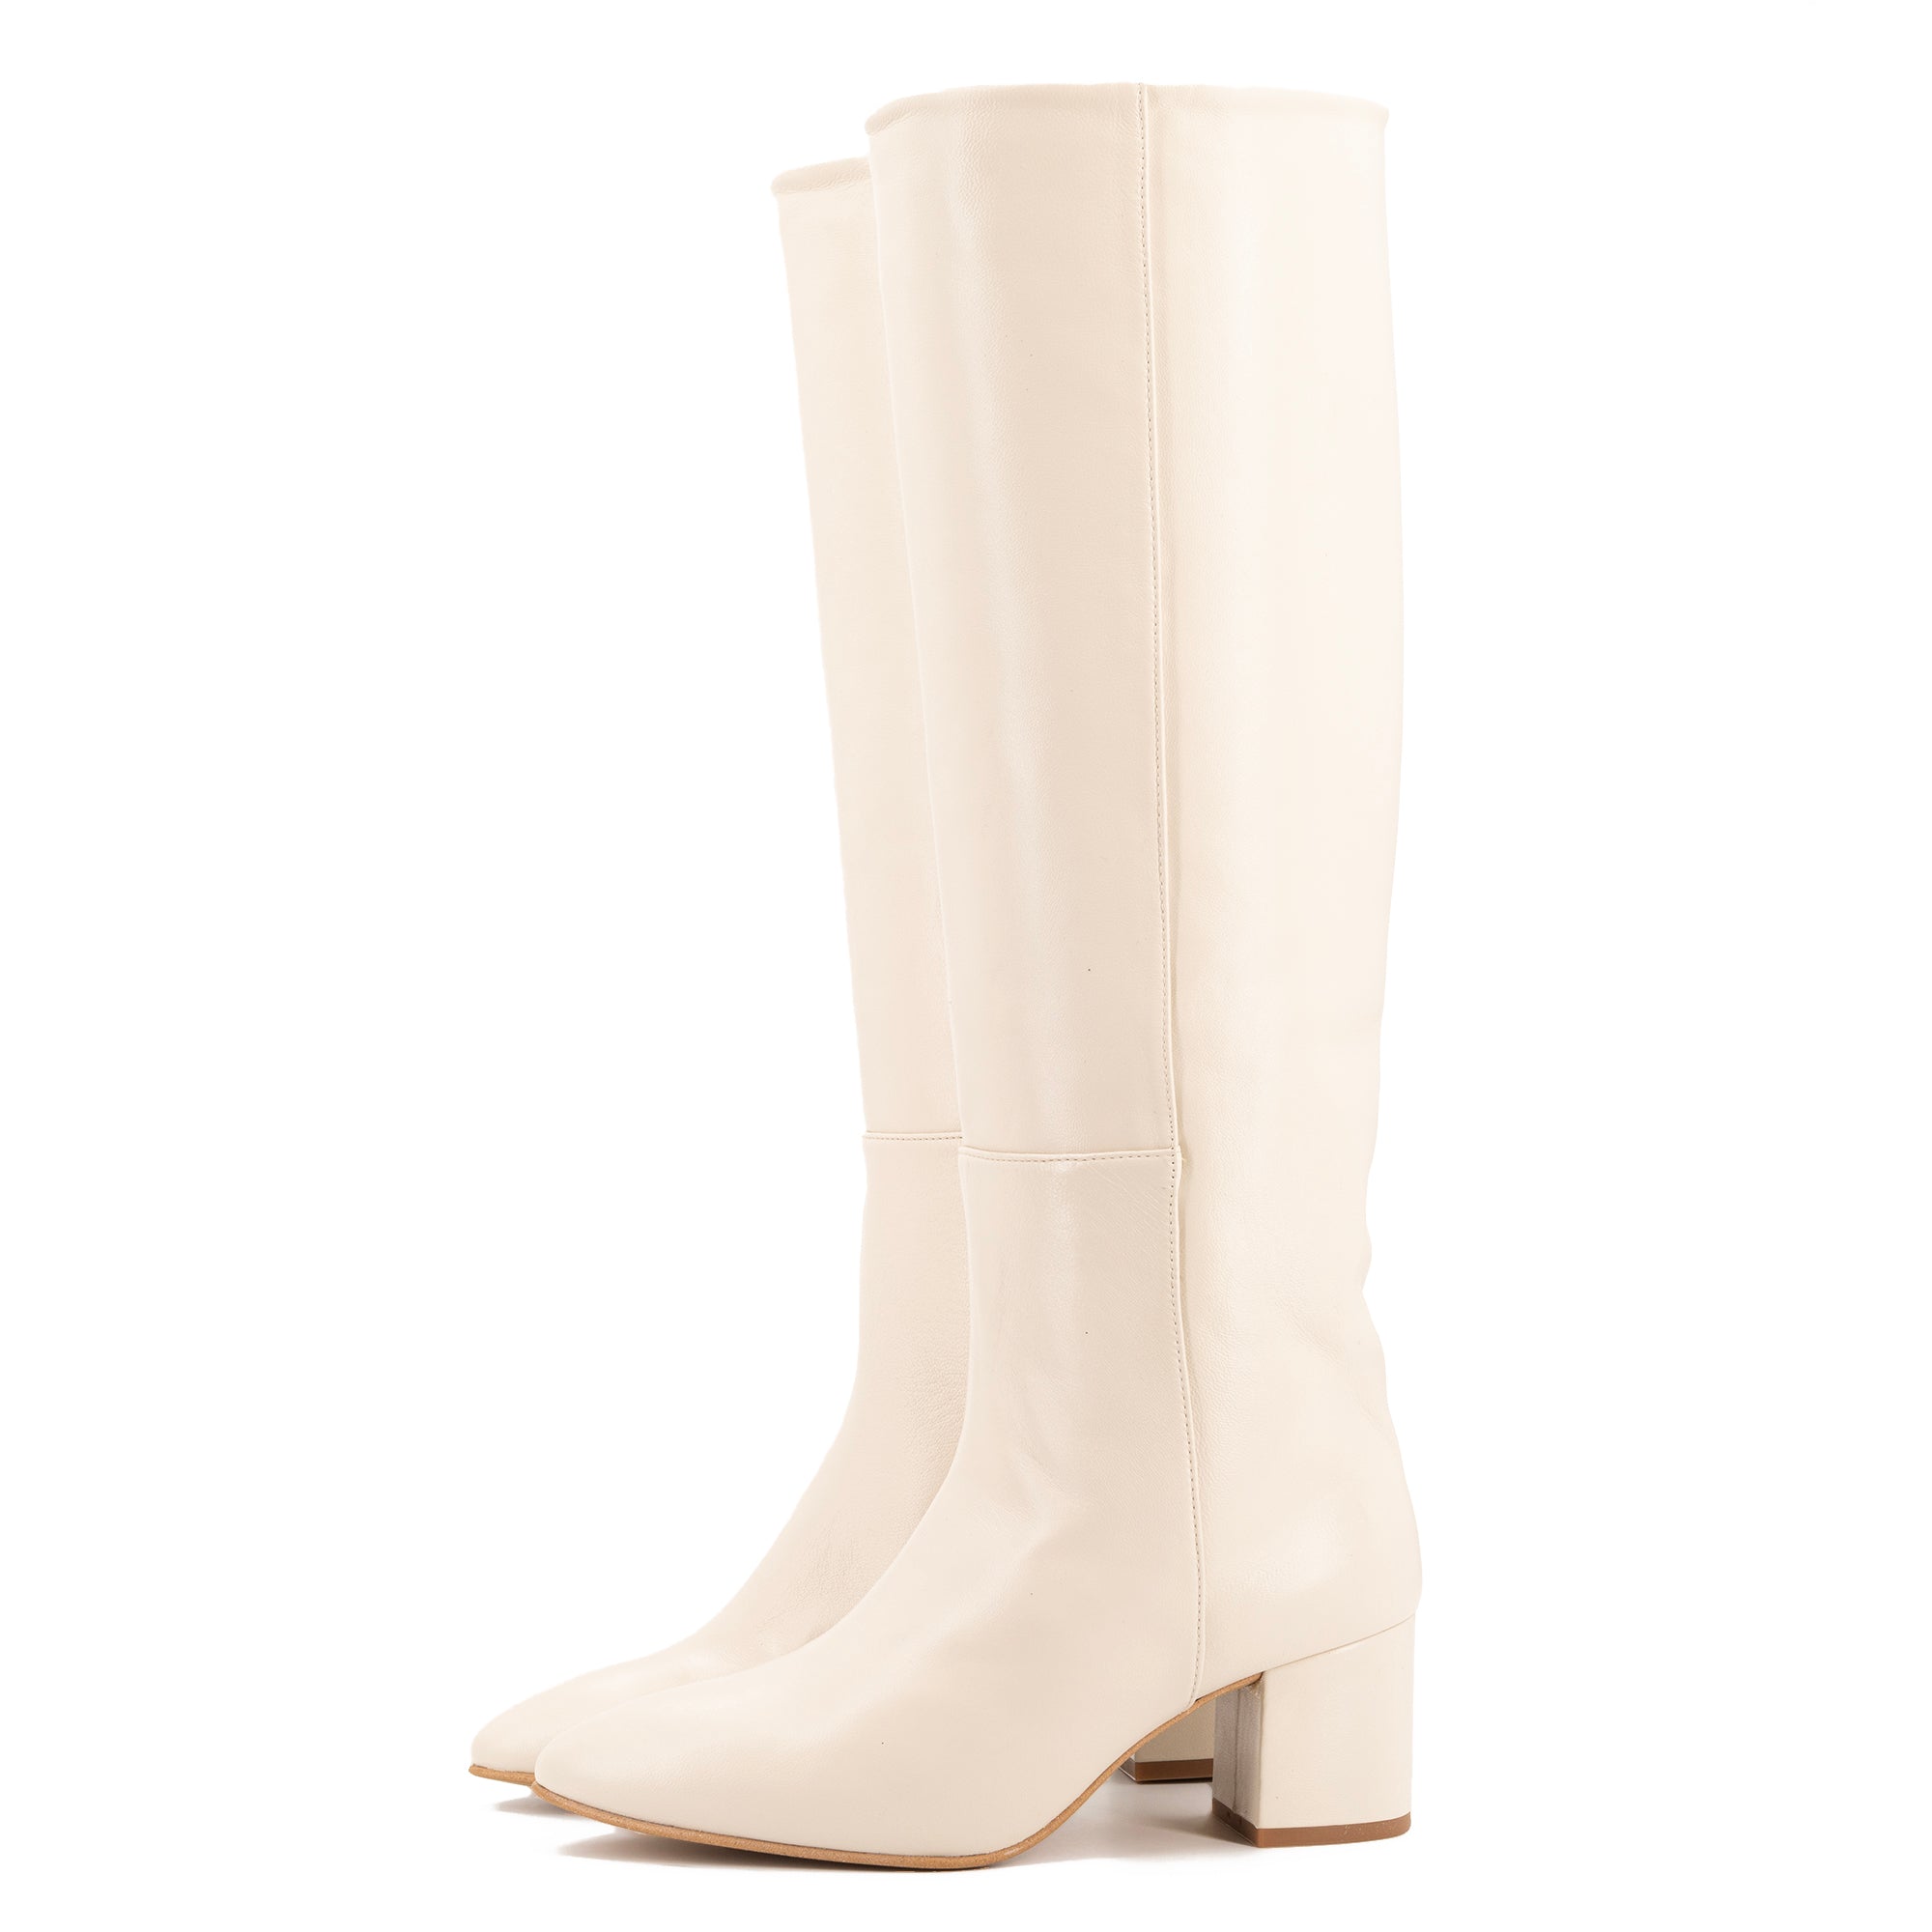 OFF-WHITE LEATHER TALL BOOTS